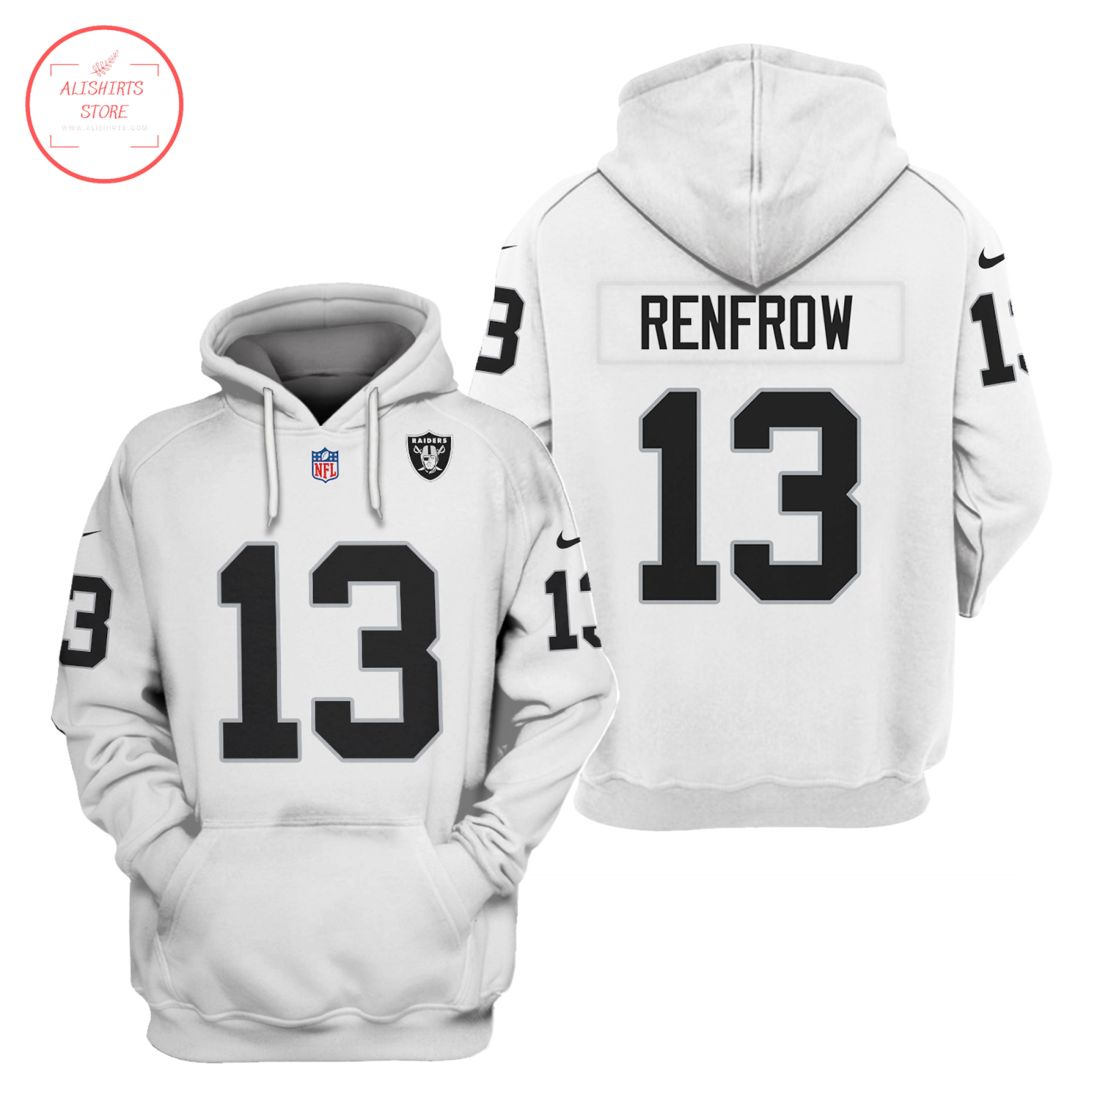 NFL Oakland Raiders Renfrow White Shirt and Hoodie